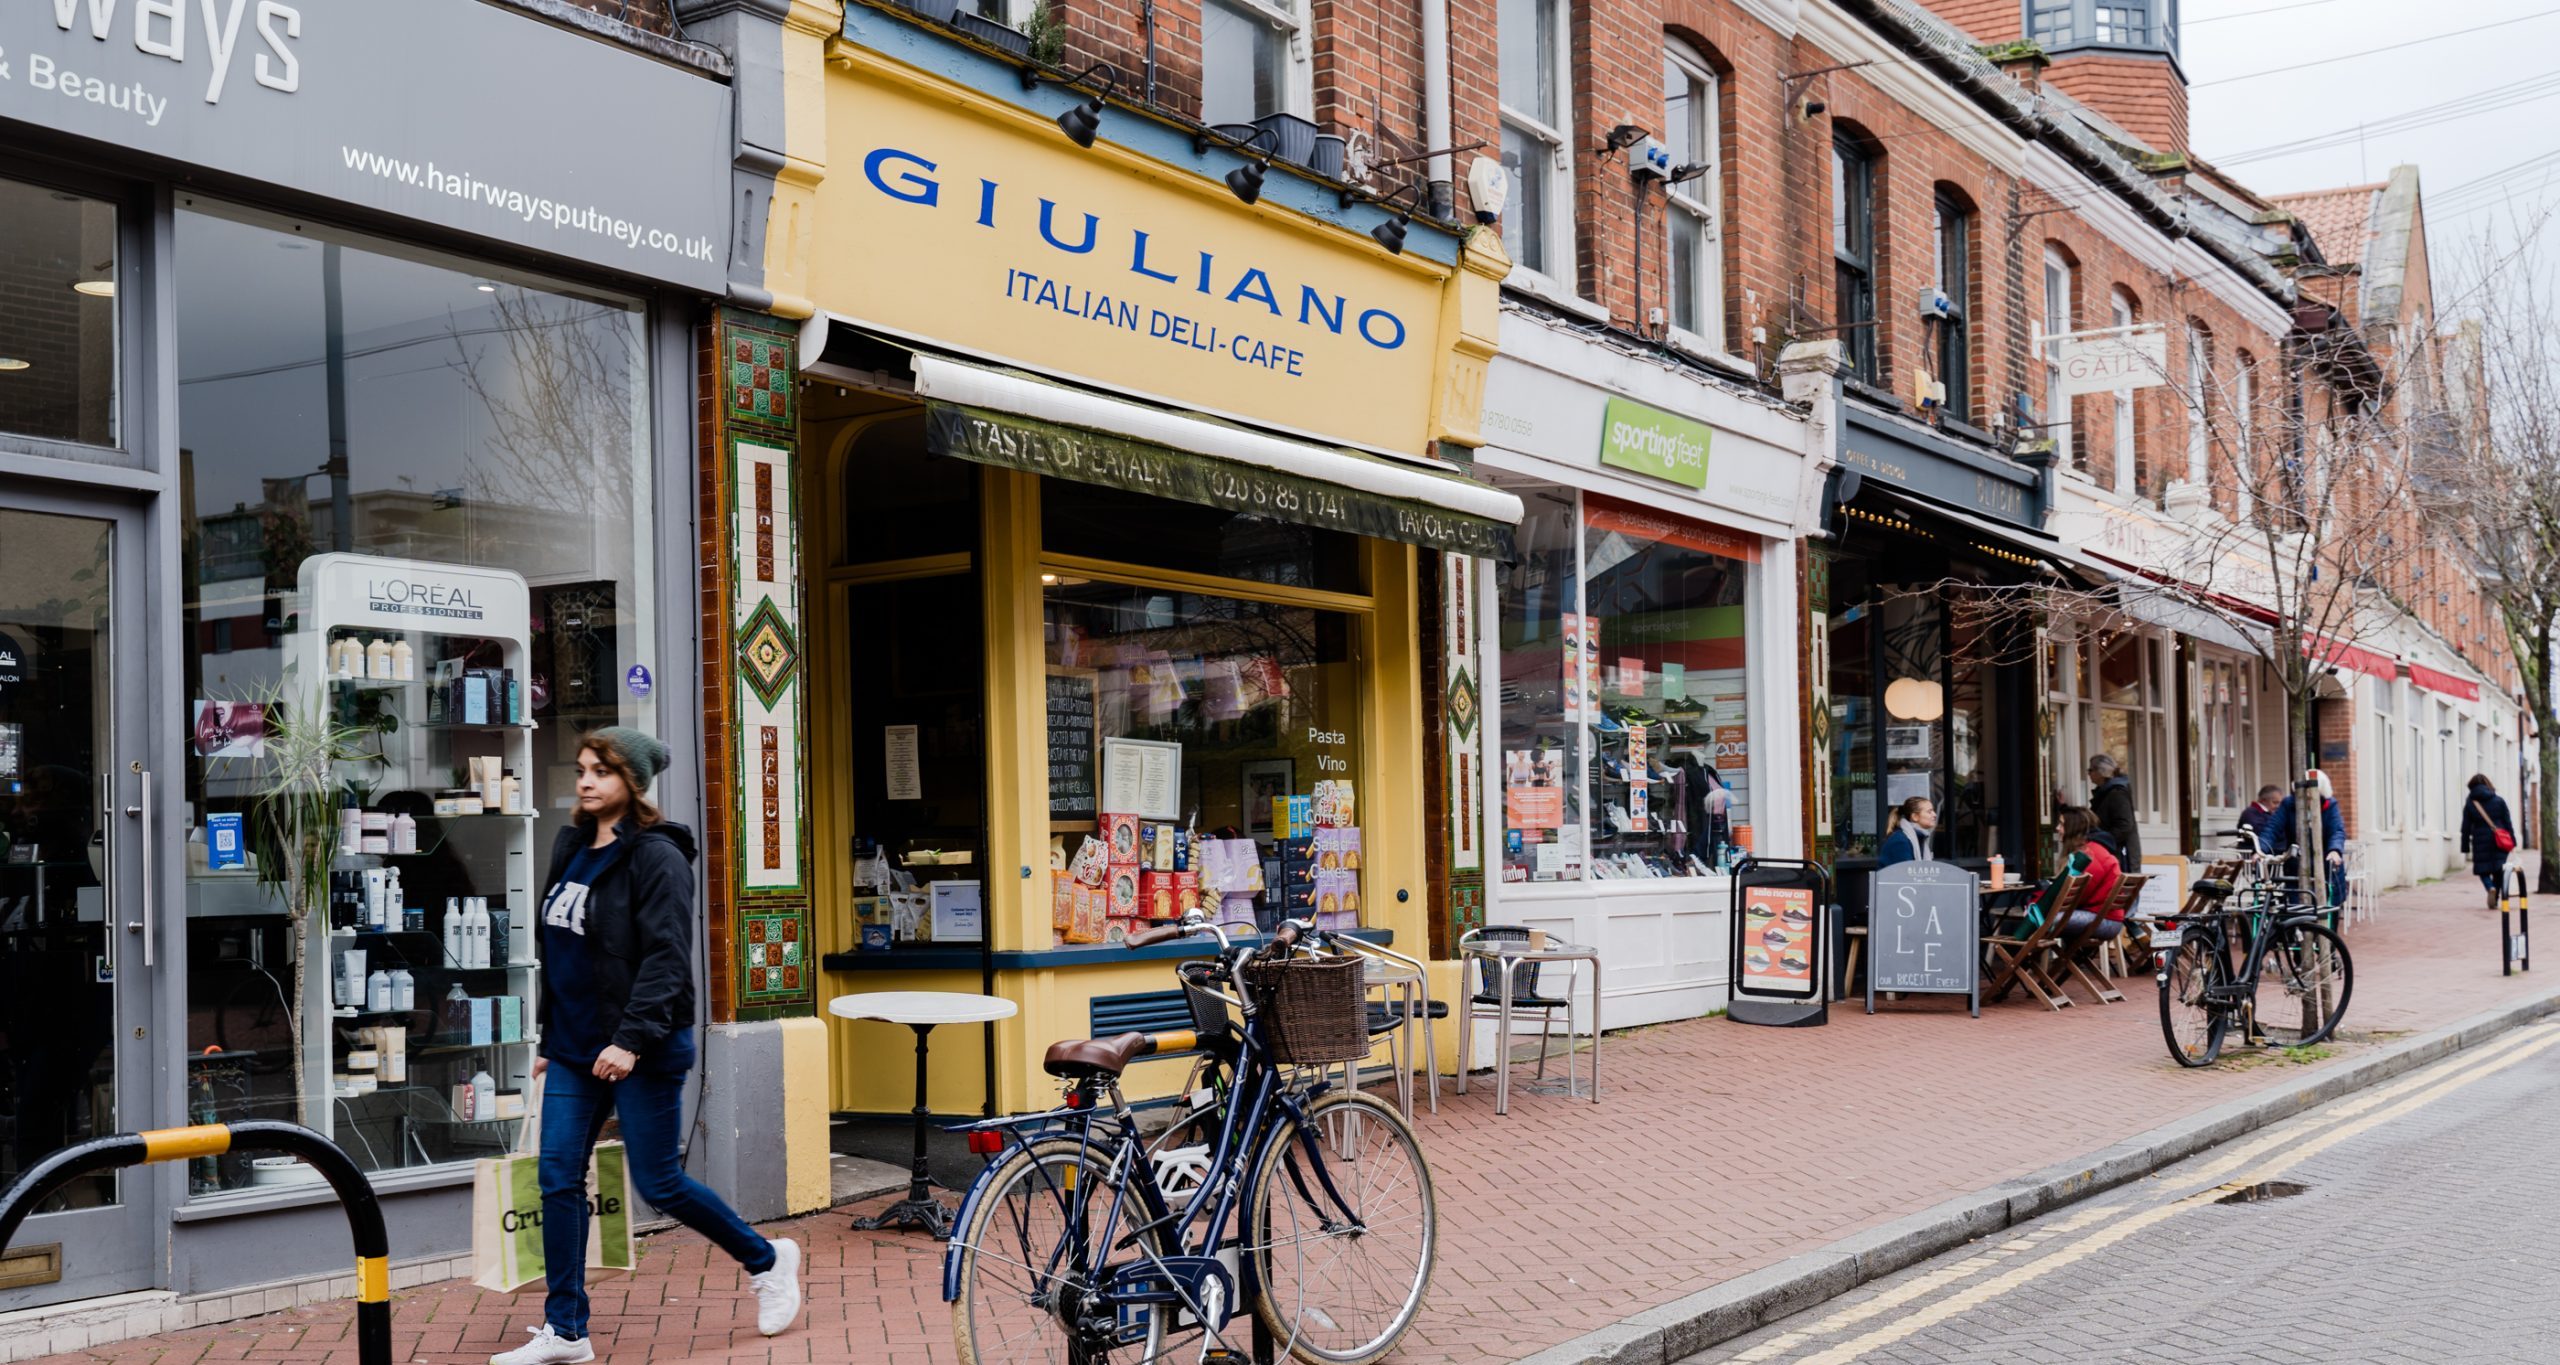 Photography of lacy road in Putney showing giuliano deli cafe, sporting feet, blabar, hairways and gails shopfronts.